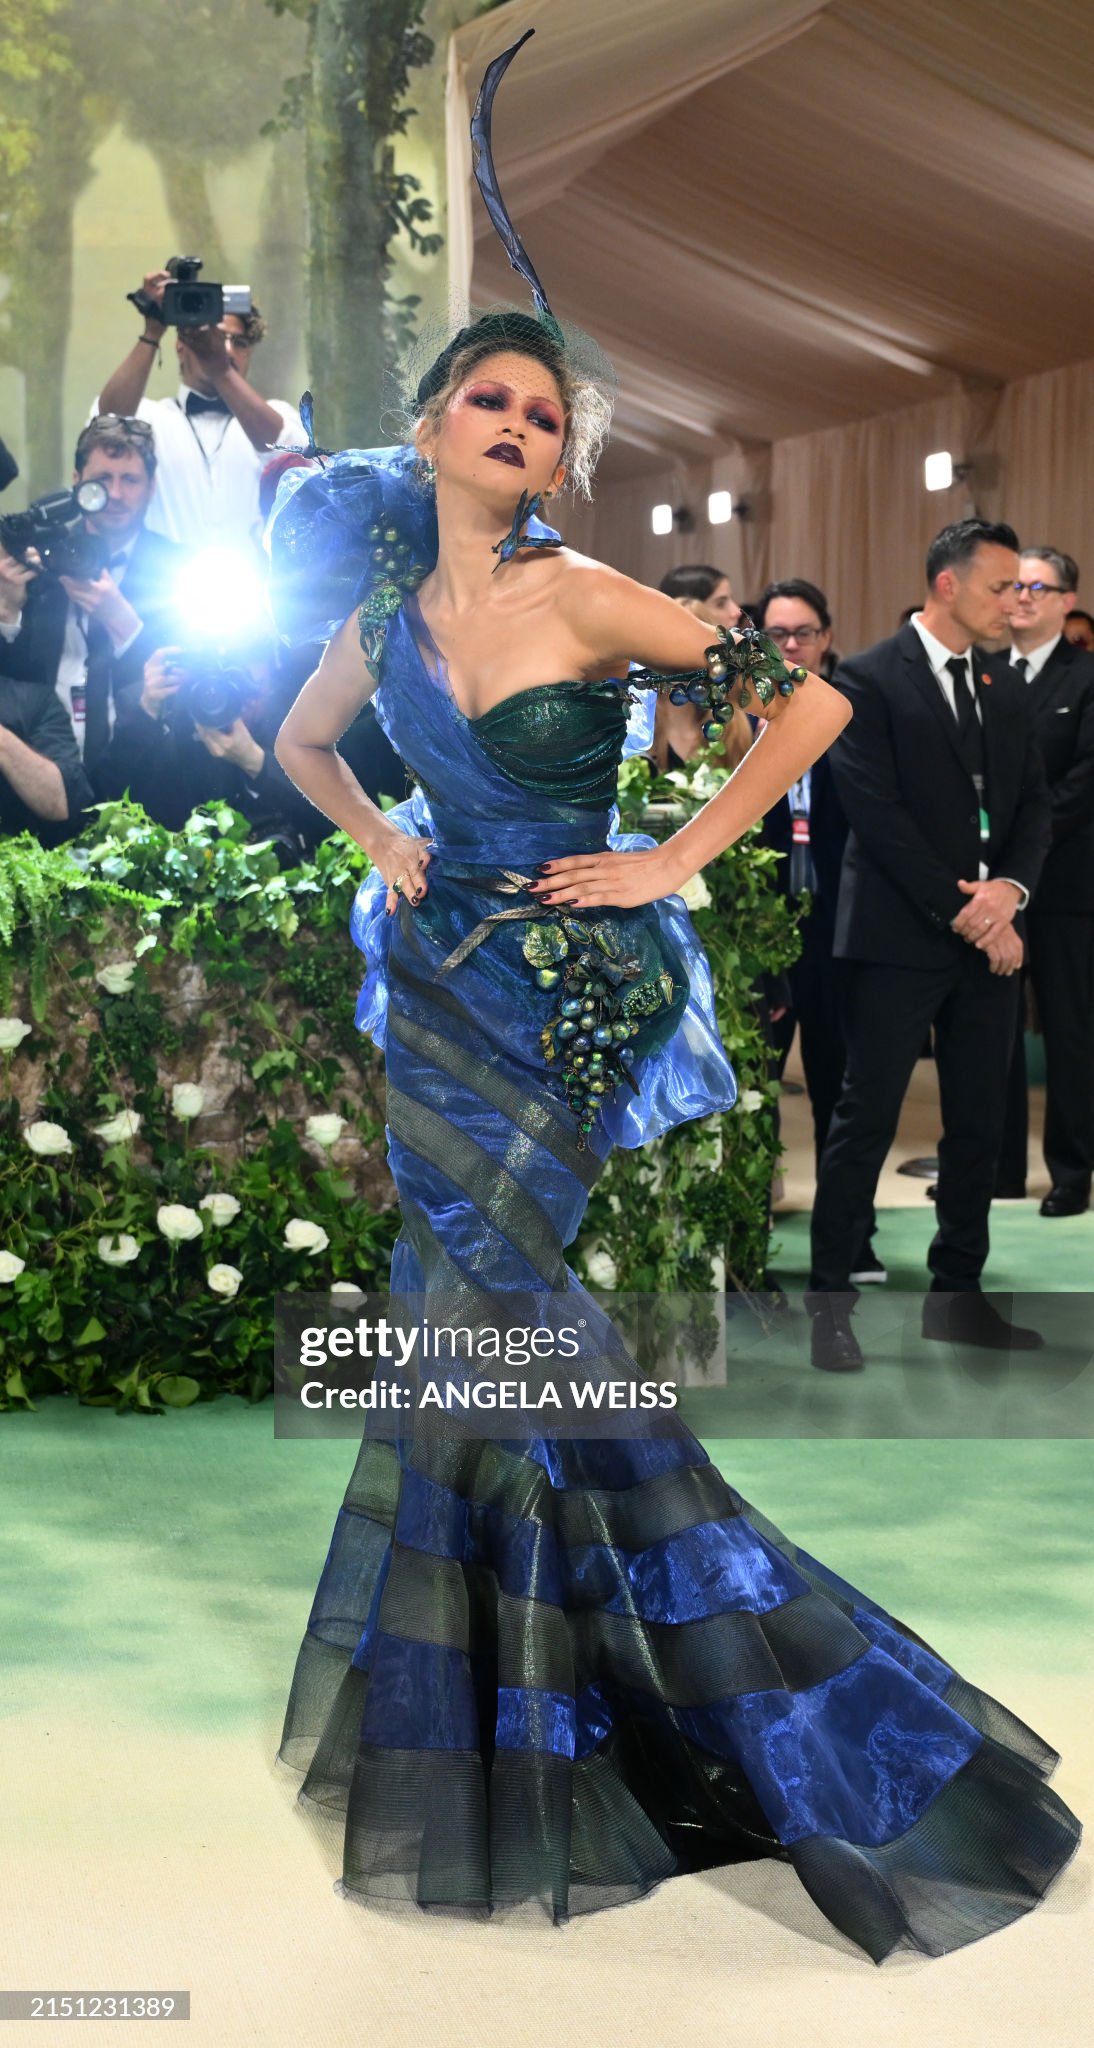 gettyimages-2151231389-2048x2048.jpg